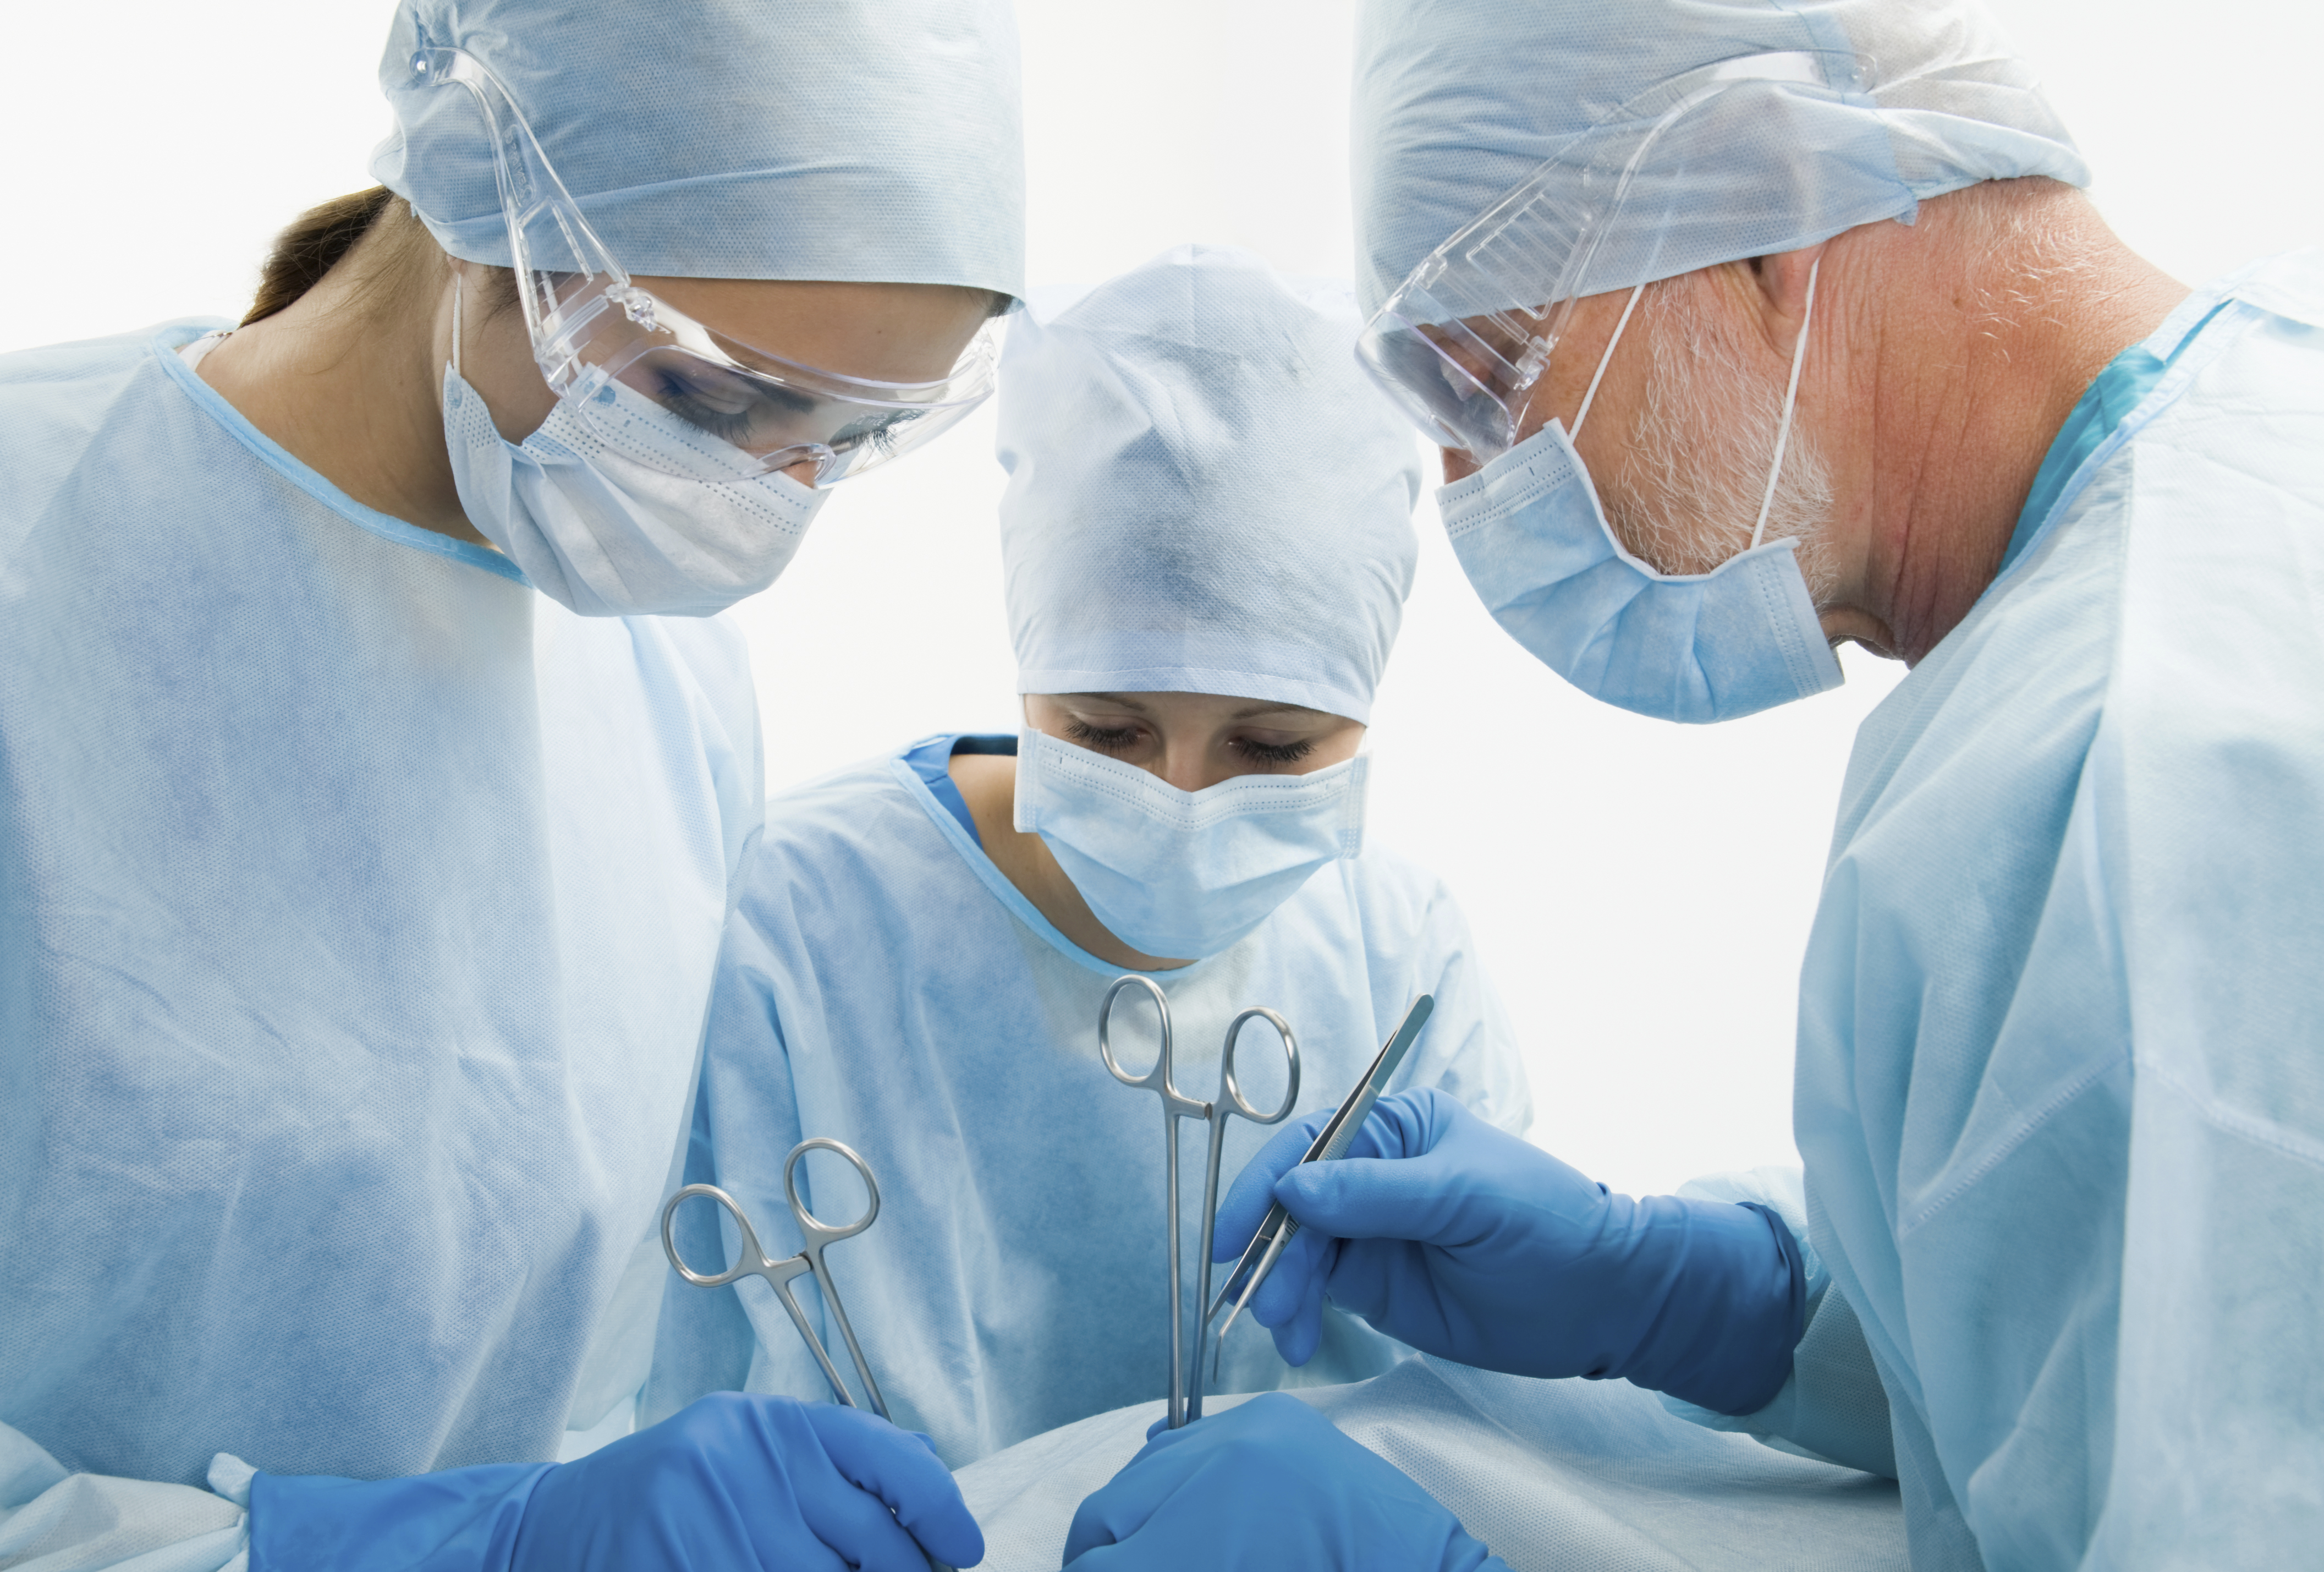 What is medical malpractice reform?